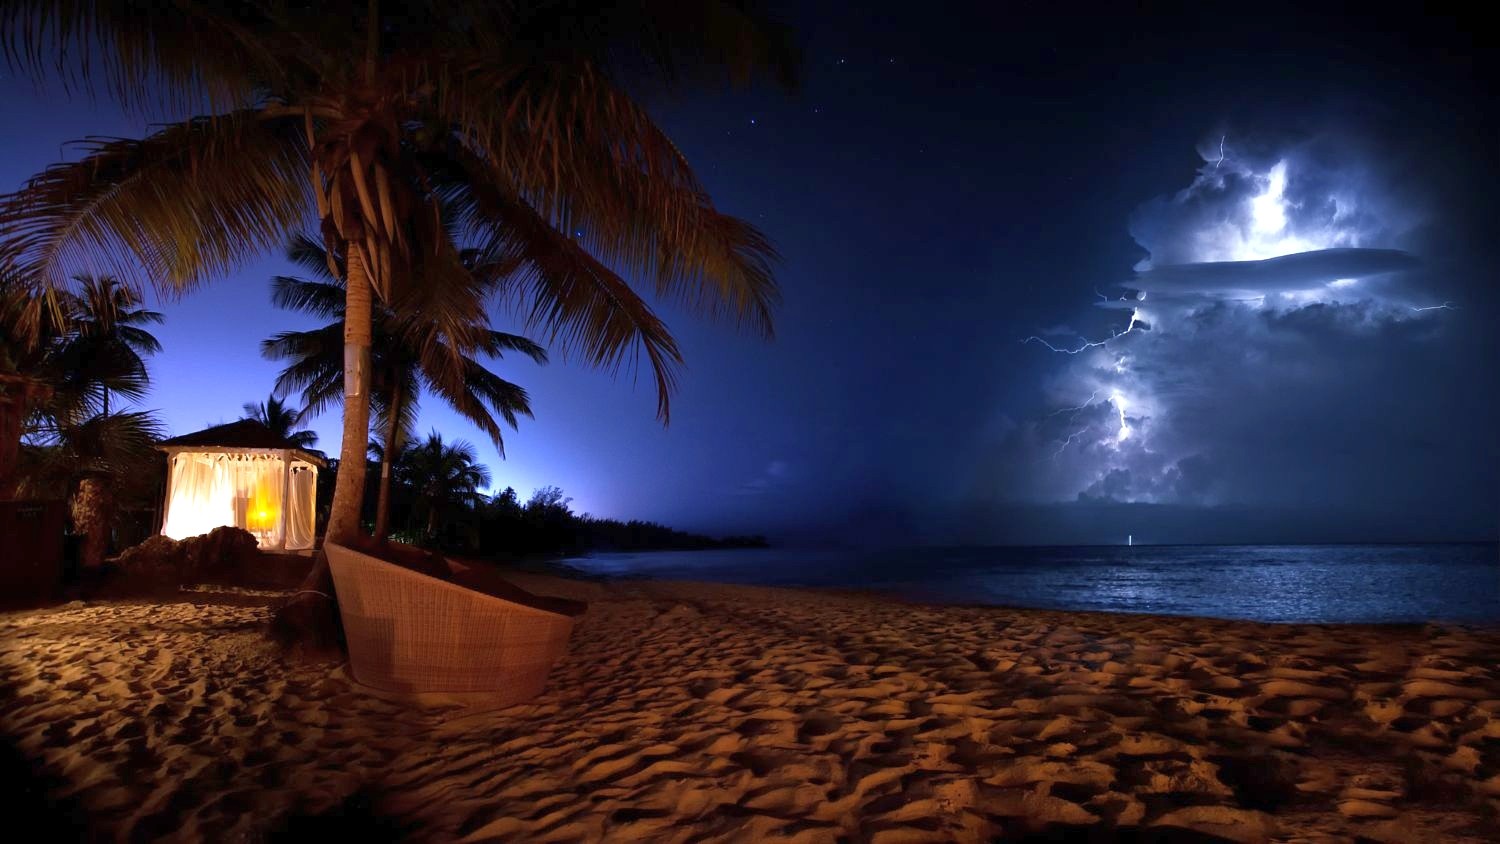 nature, Photography, Landscape, Palm trees, Beach, Sea, Sand, Storm, Lightning, Cocktails, Puerto Rico, Night Wallpaper